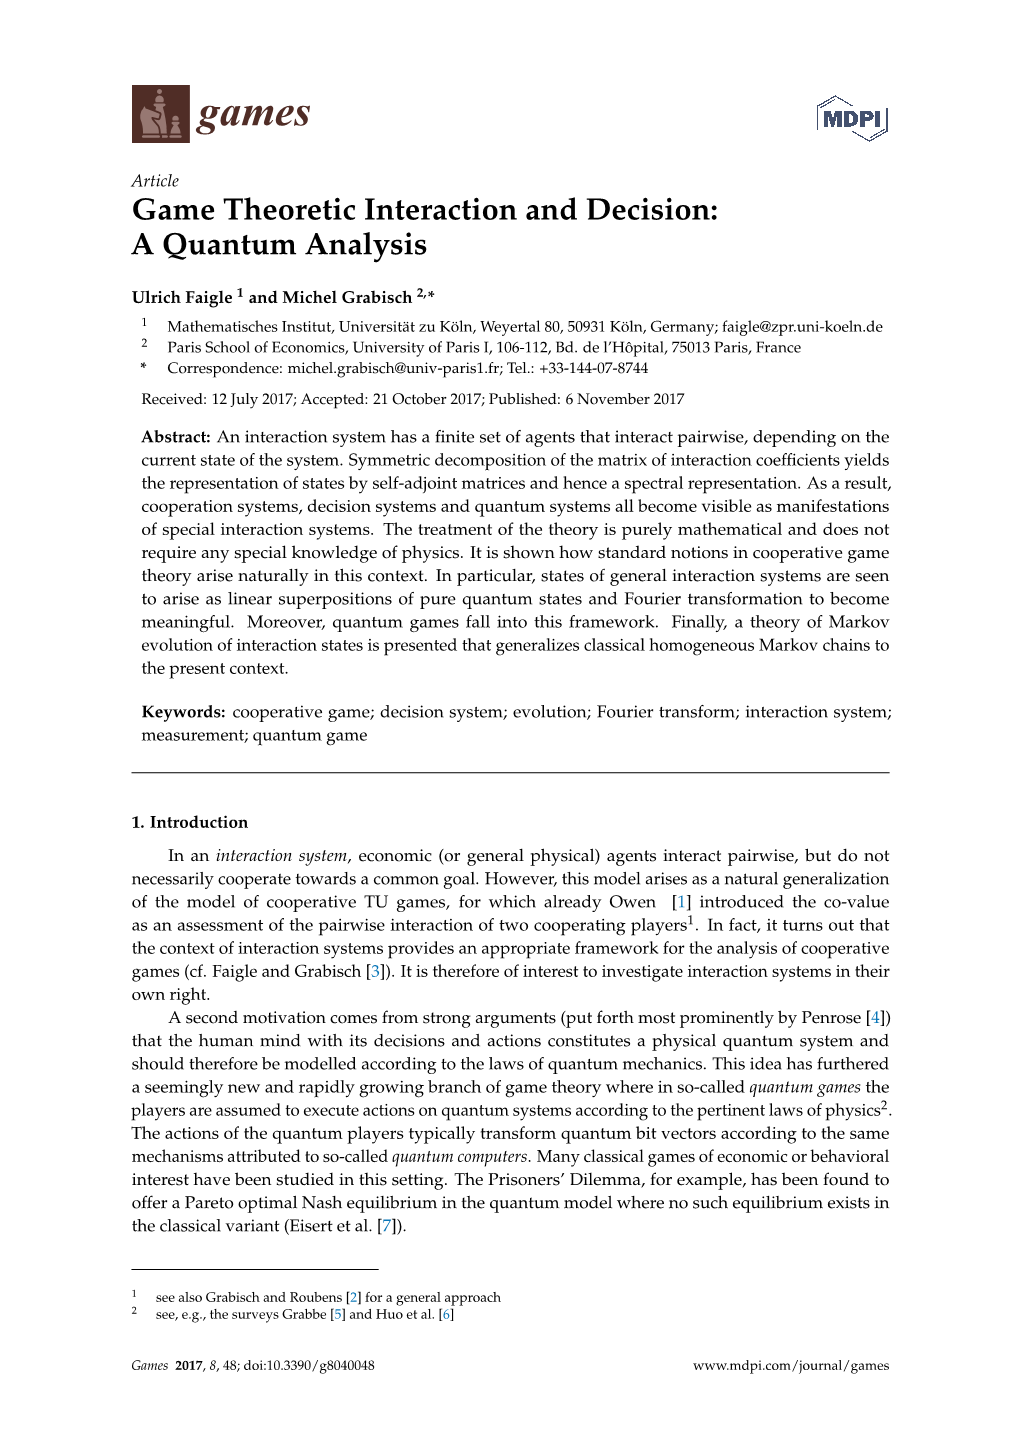 Game Theoretic Interaction and Decision: a Quantum Analysis